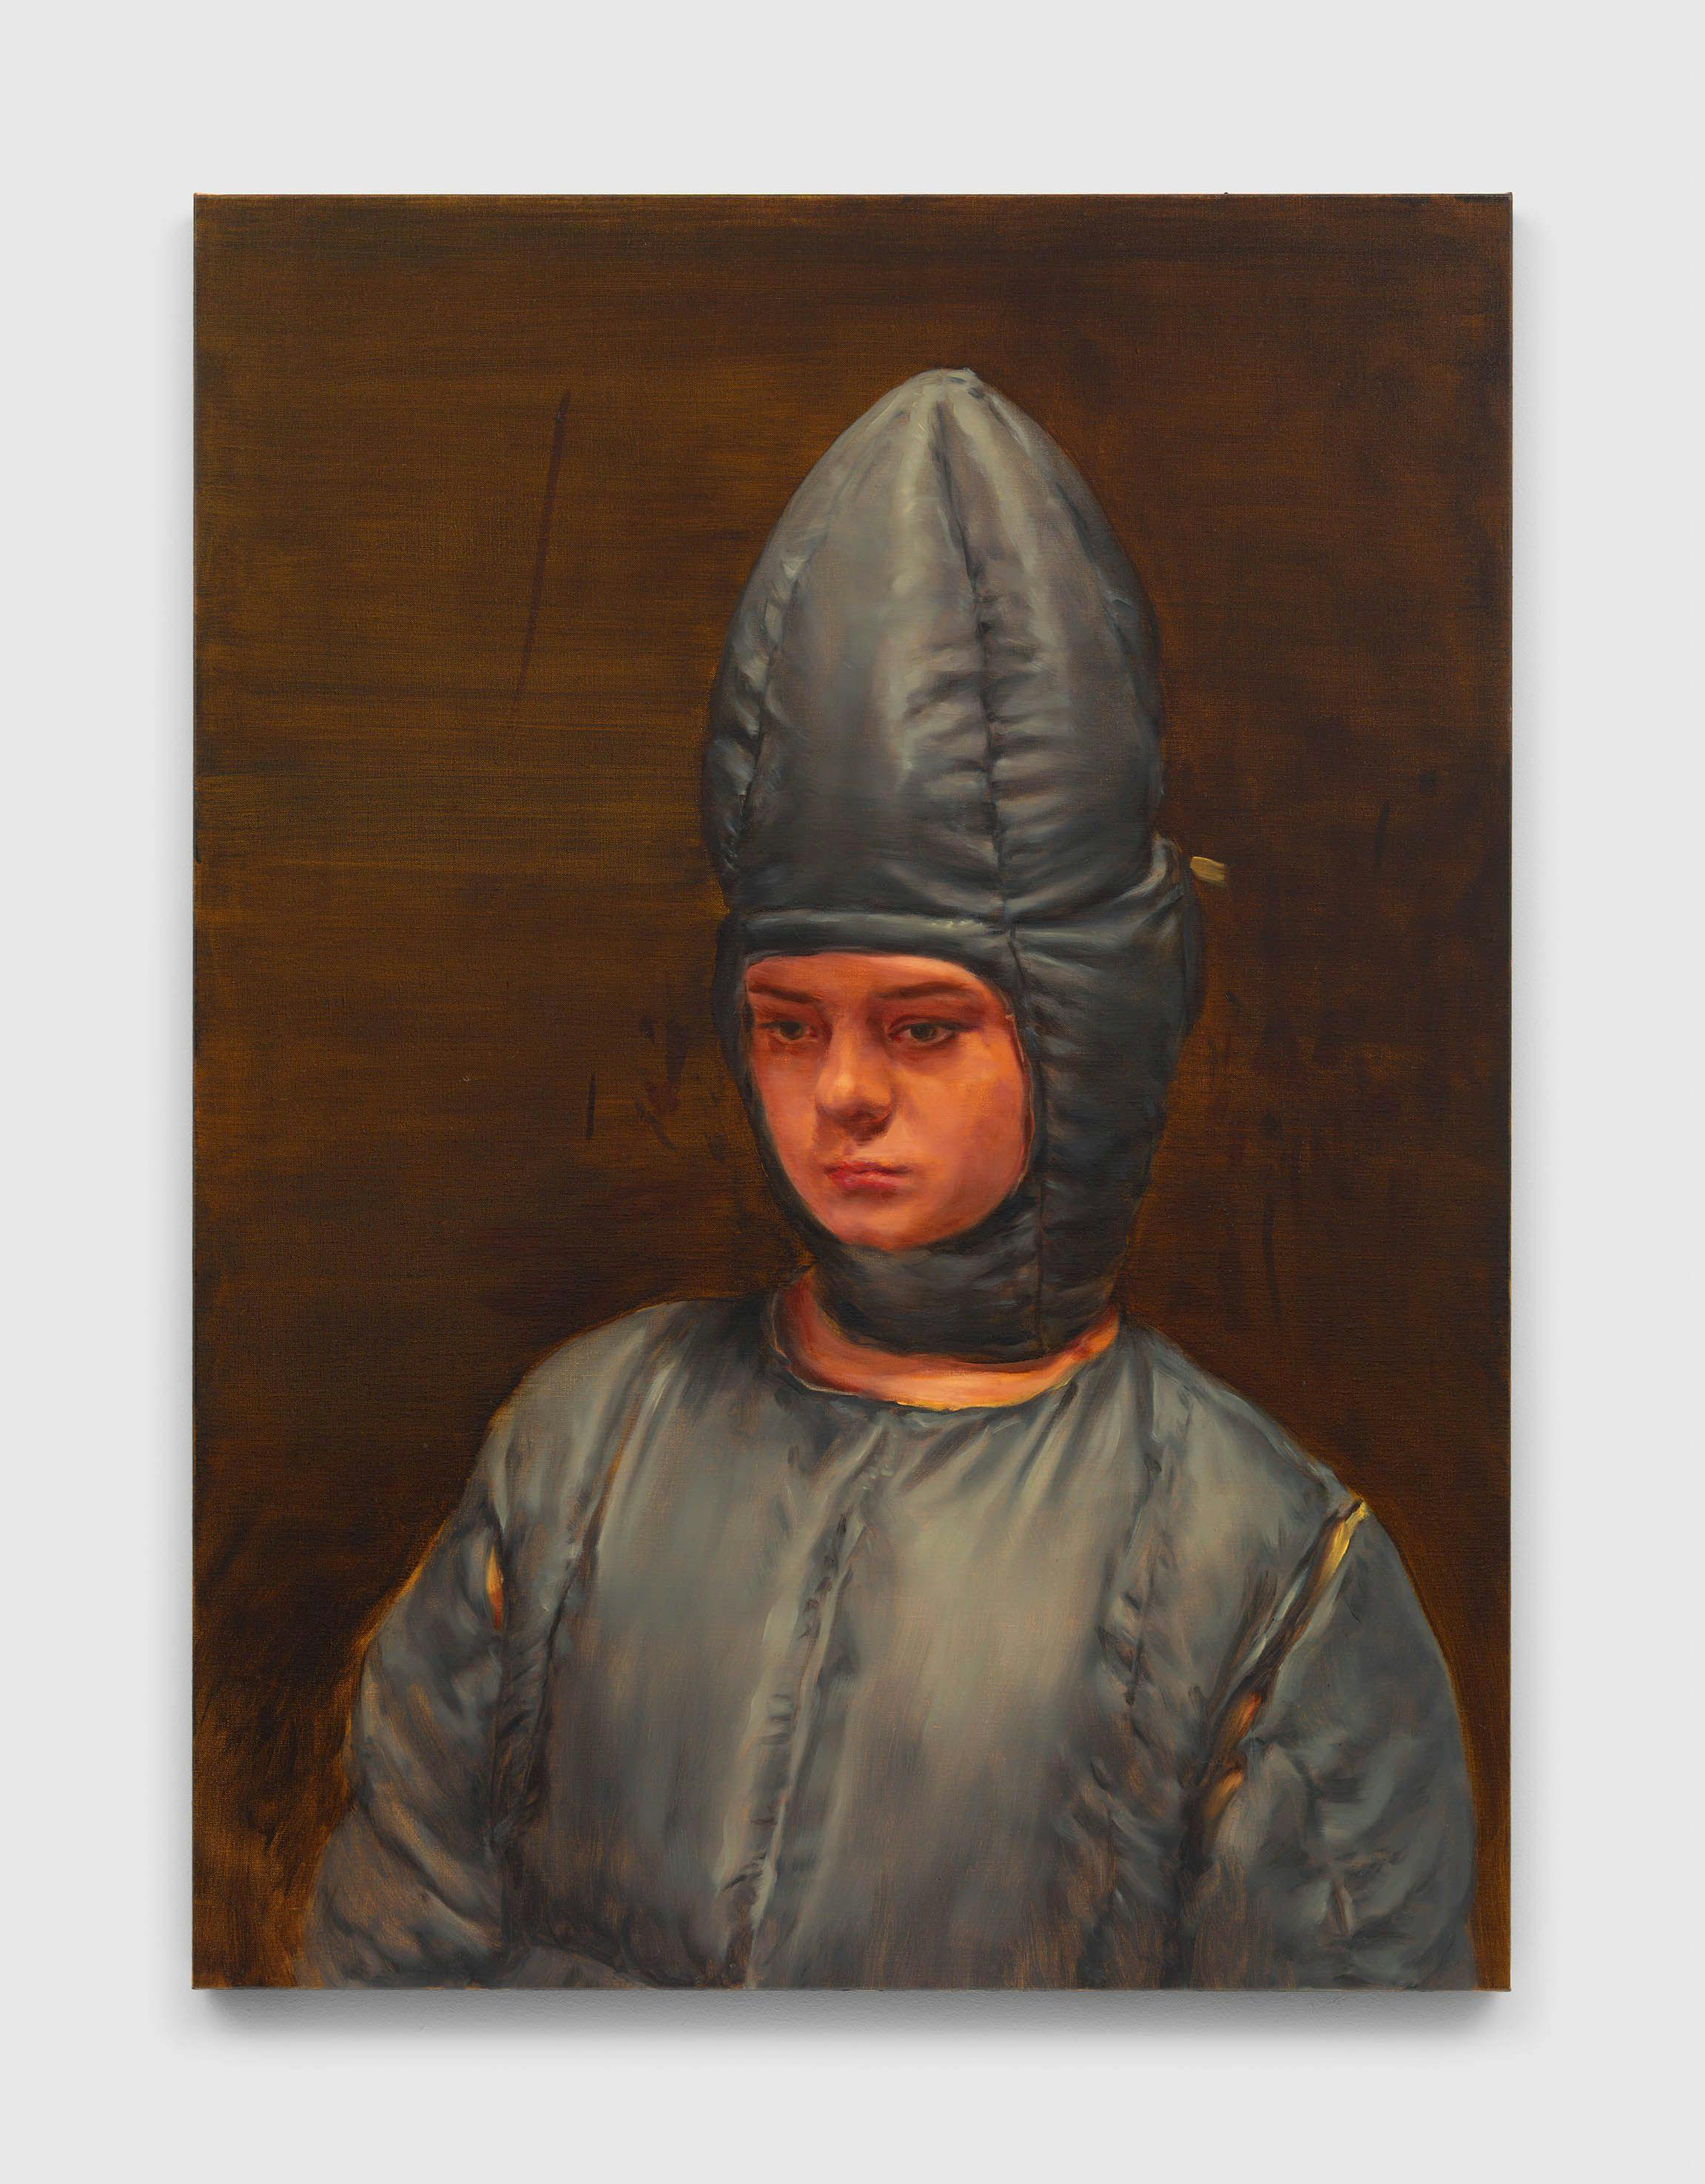 A painting by Michaël Borremans, titled The Pilot,  dated 2021.